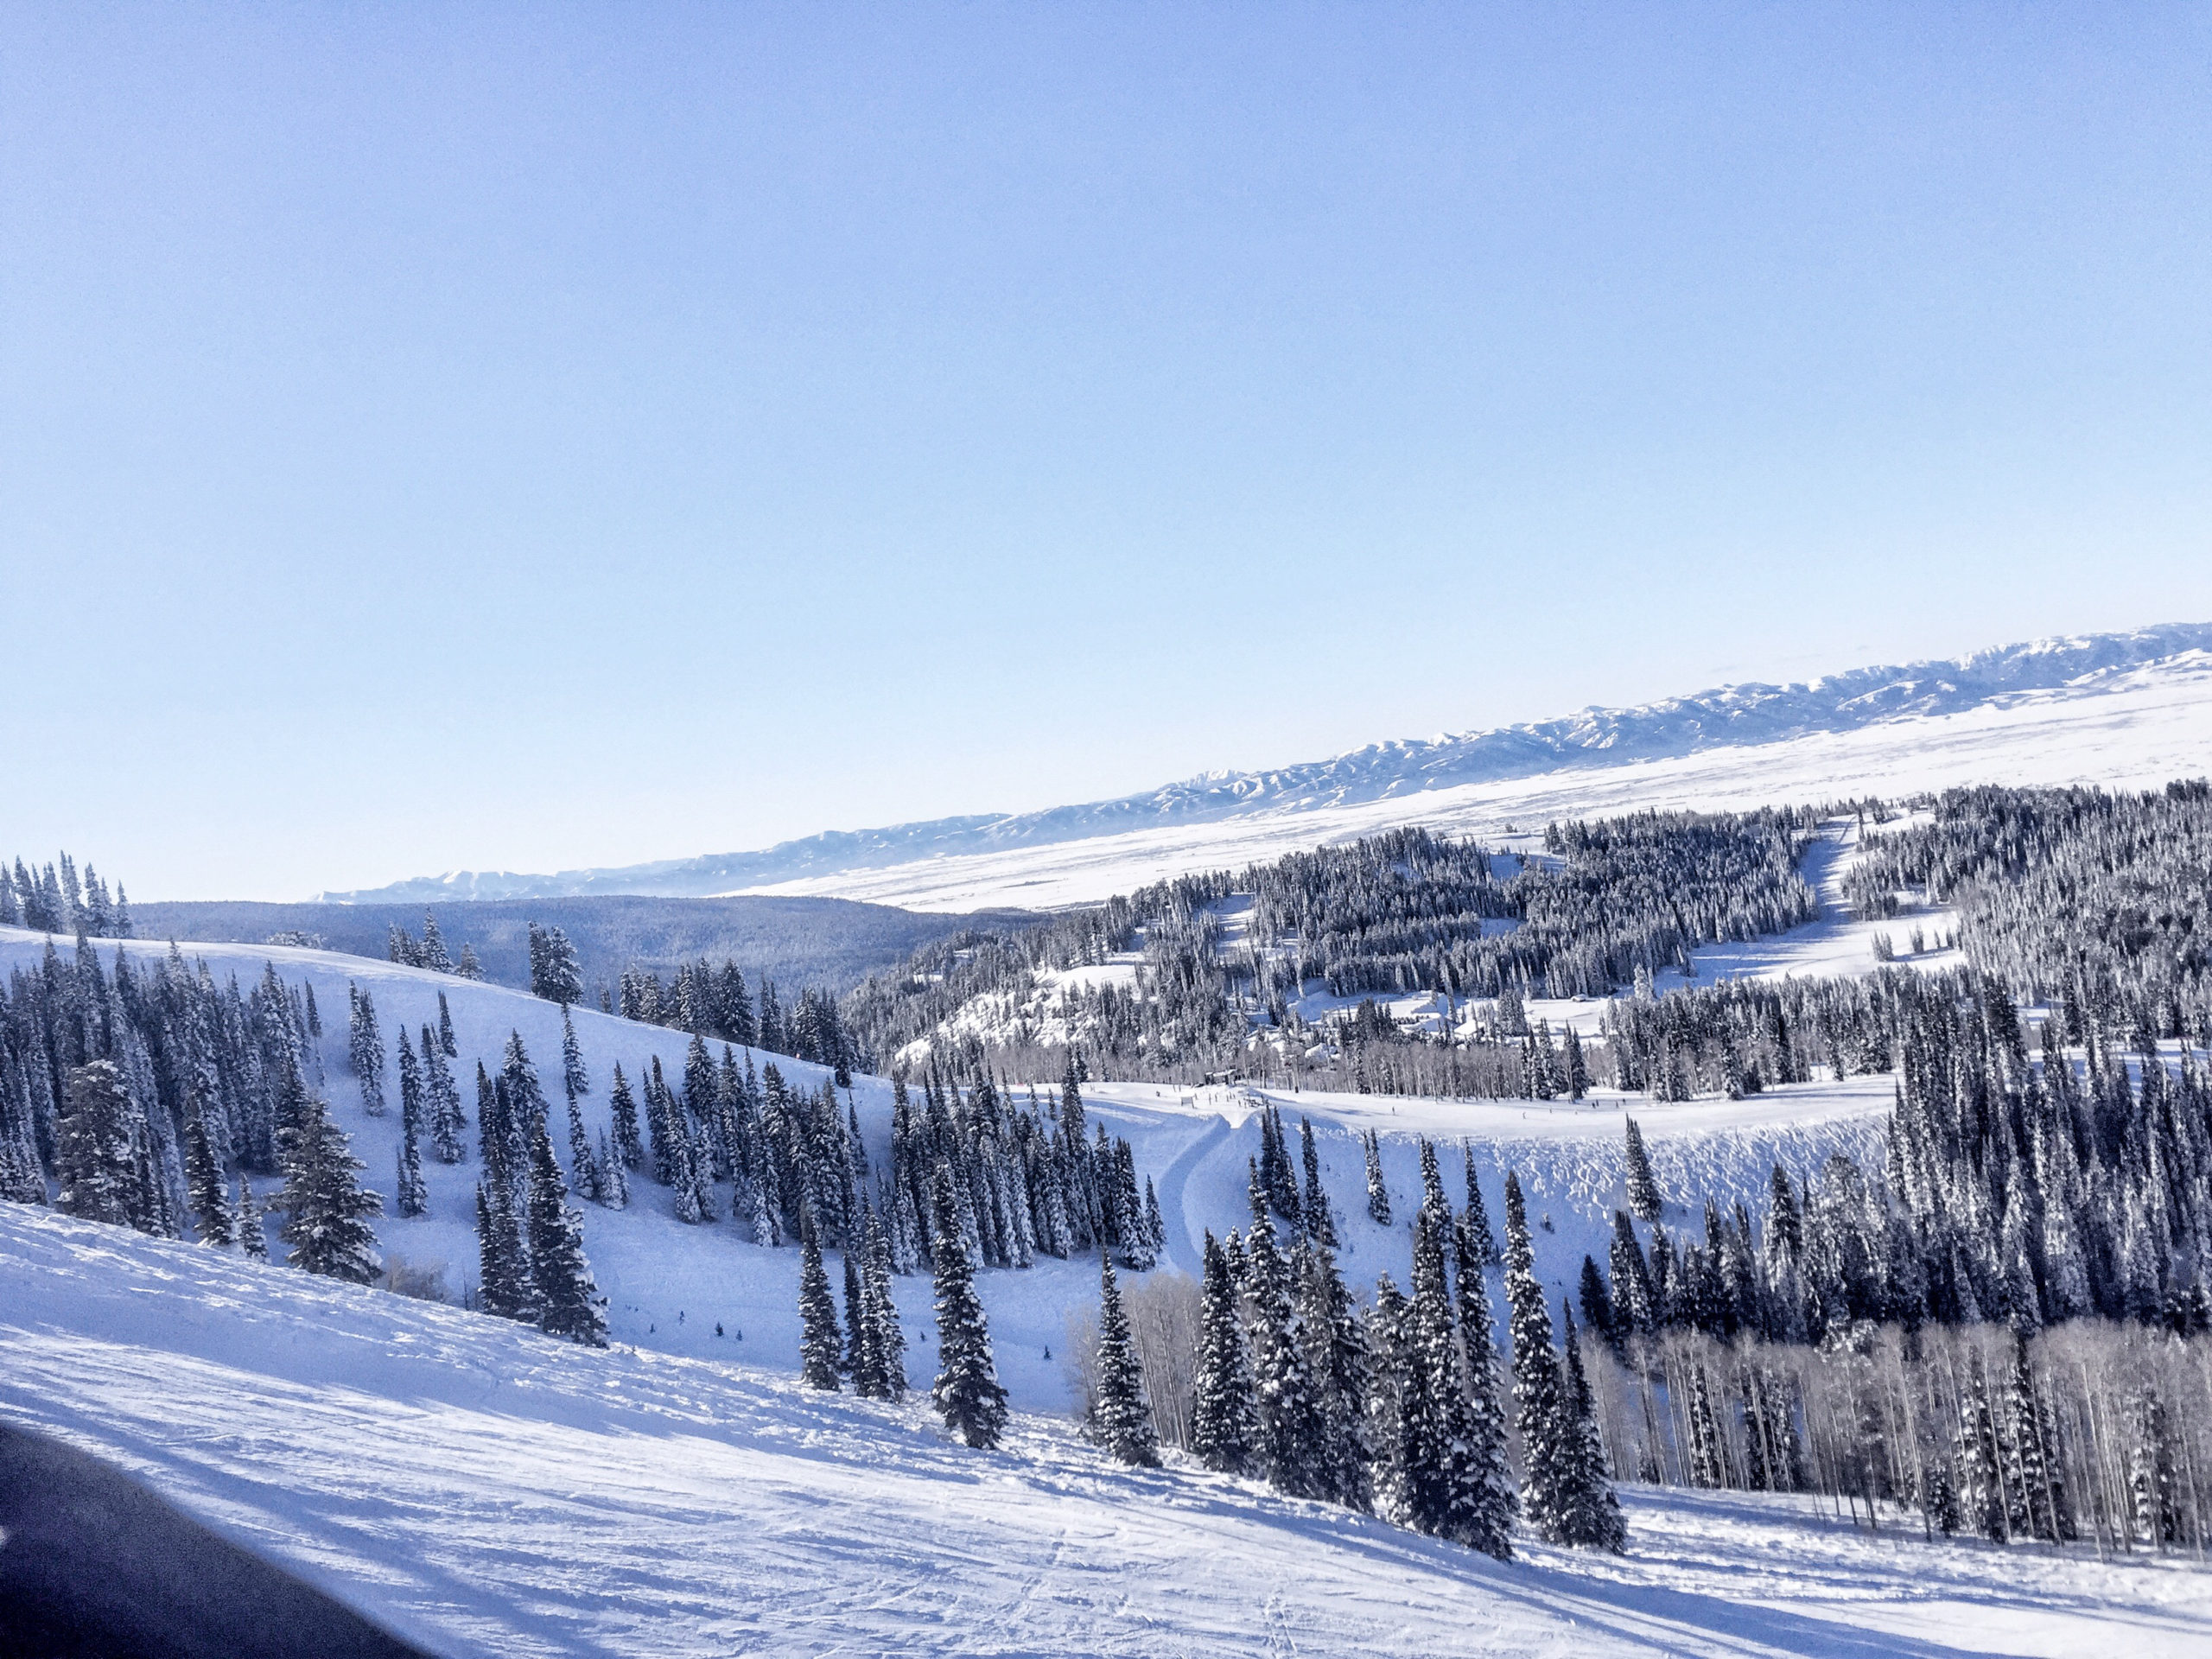 A Jackson Hole Winter Update for the 2020/2021 Season